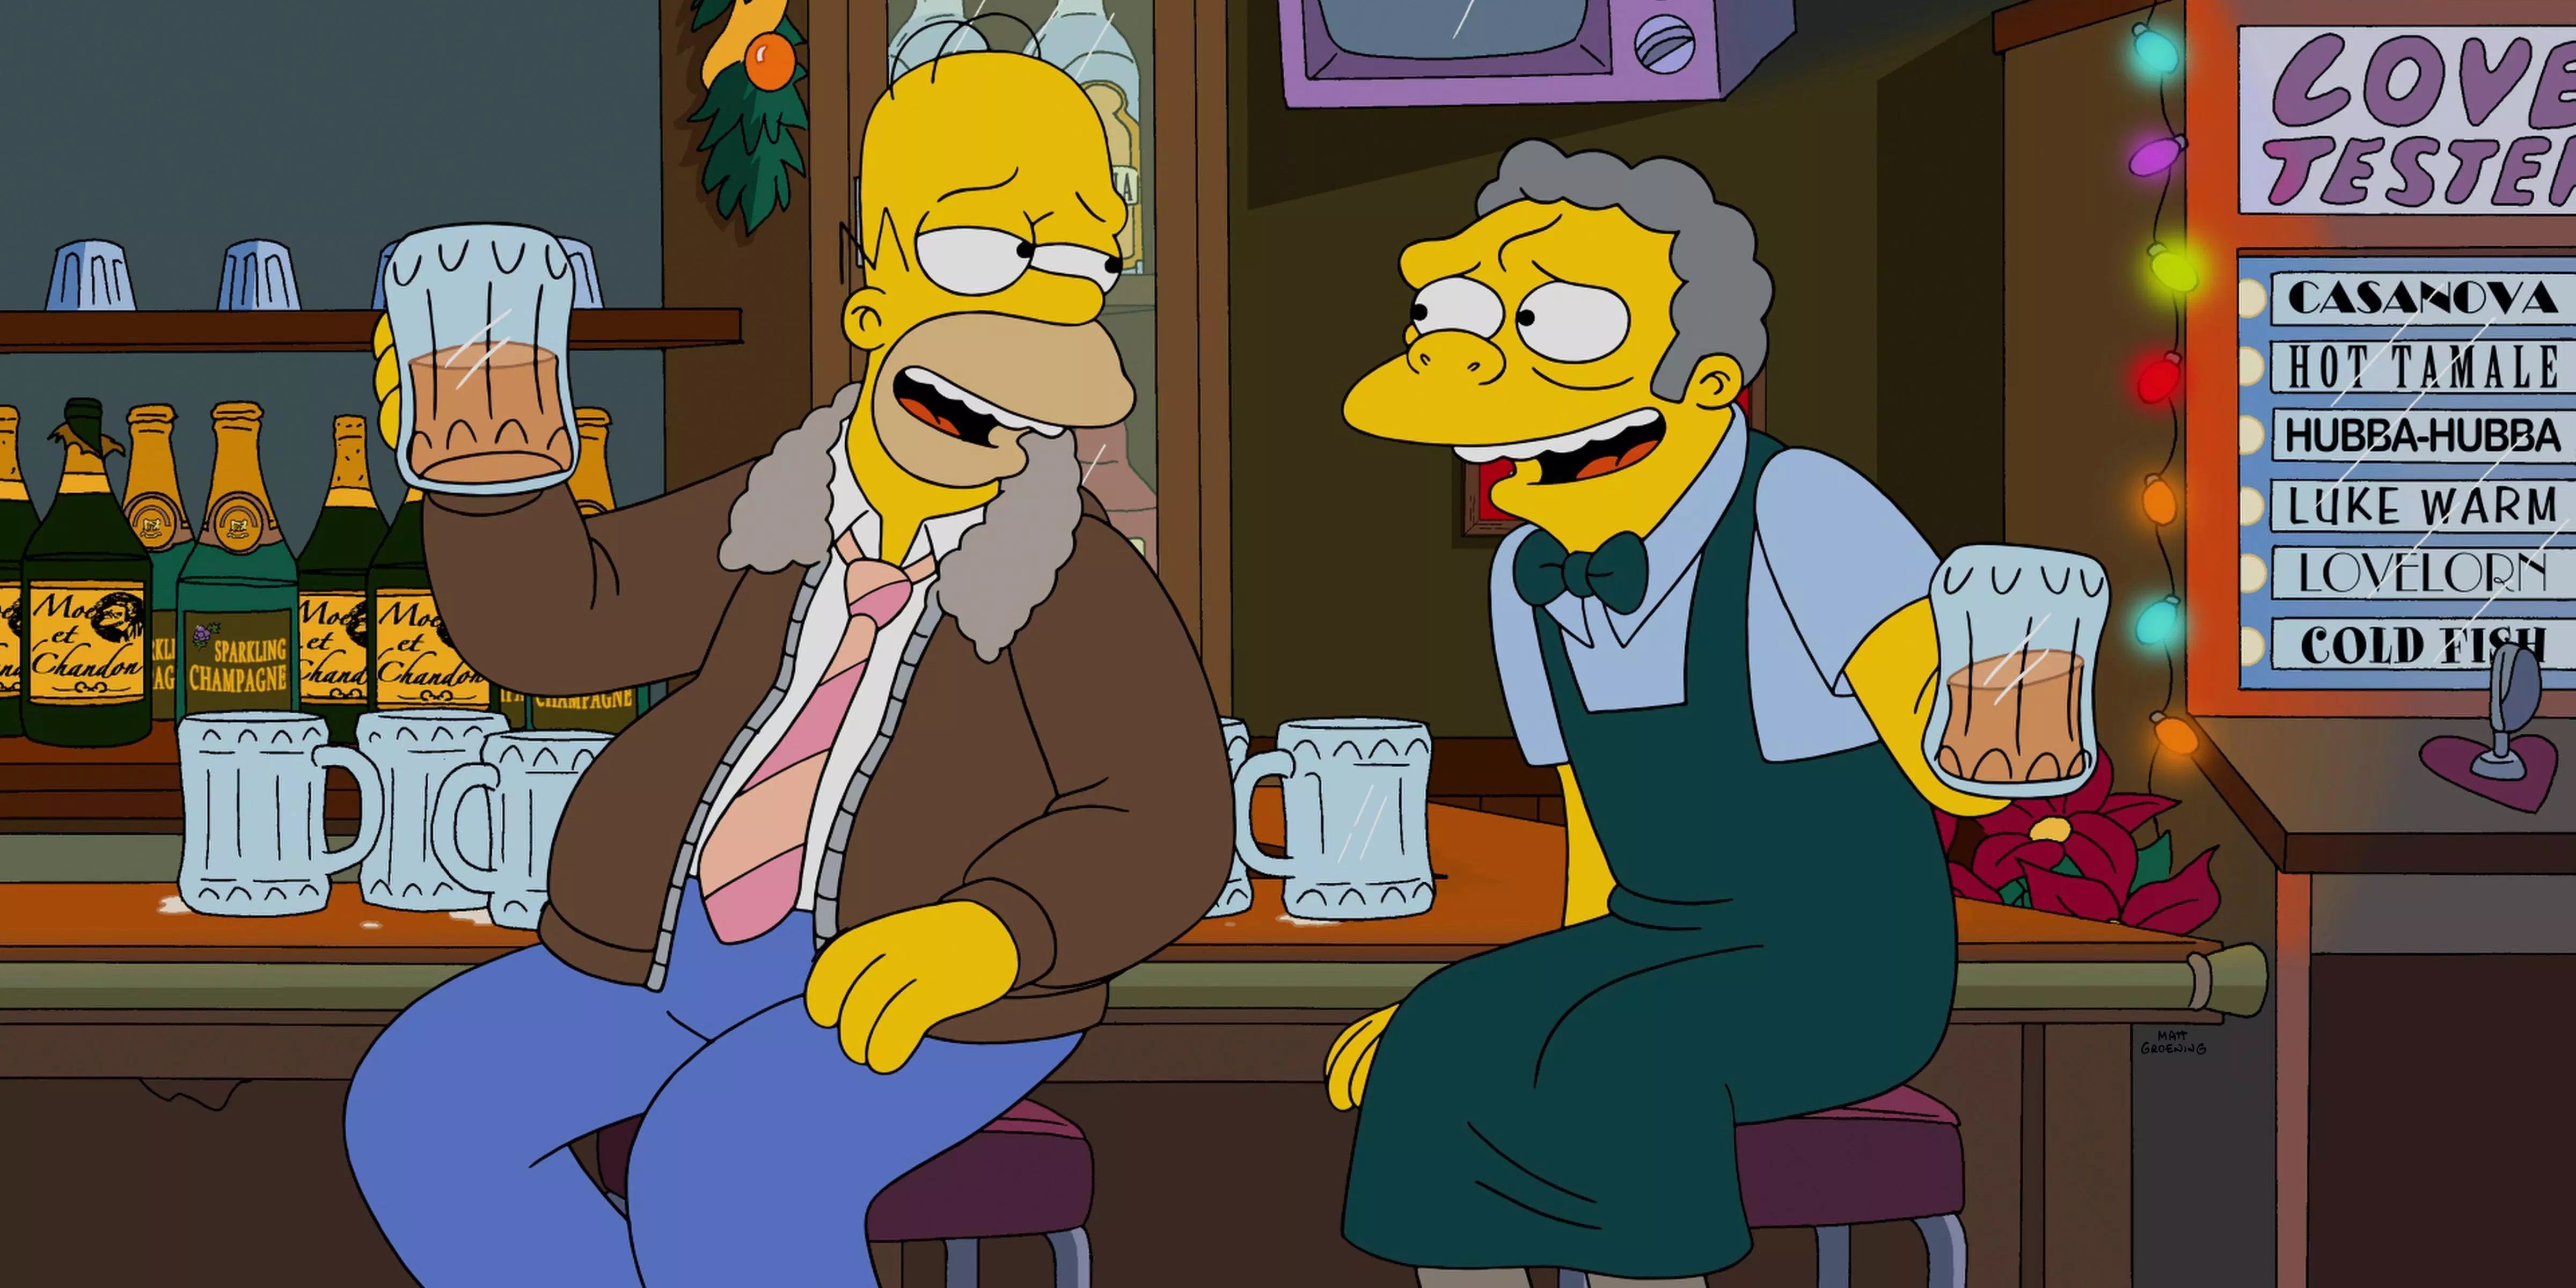 Homer has a chat with Moe while having a drink